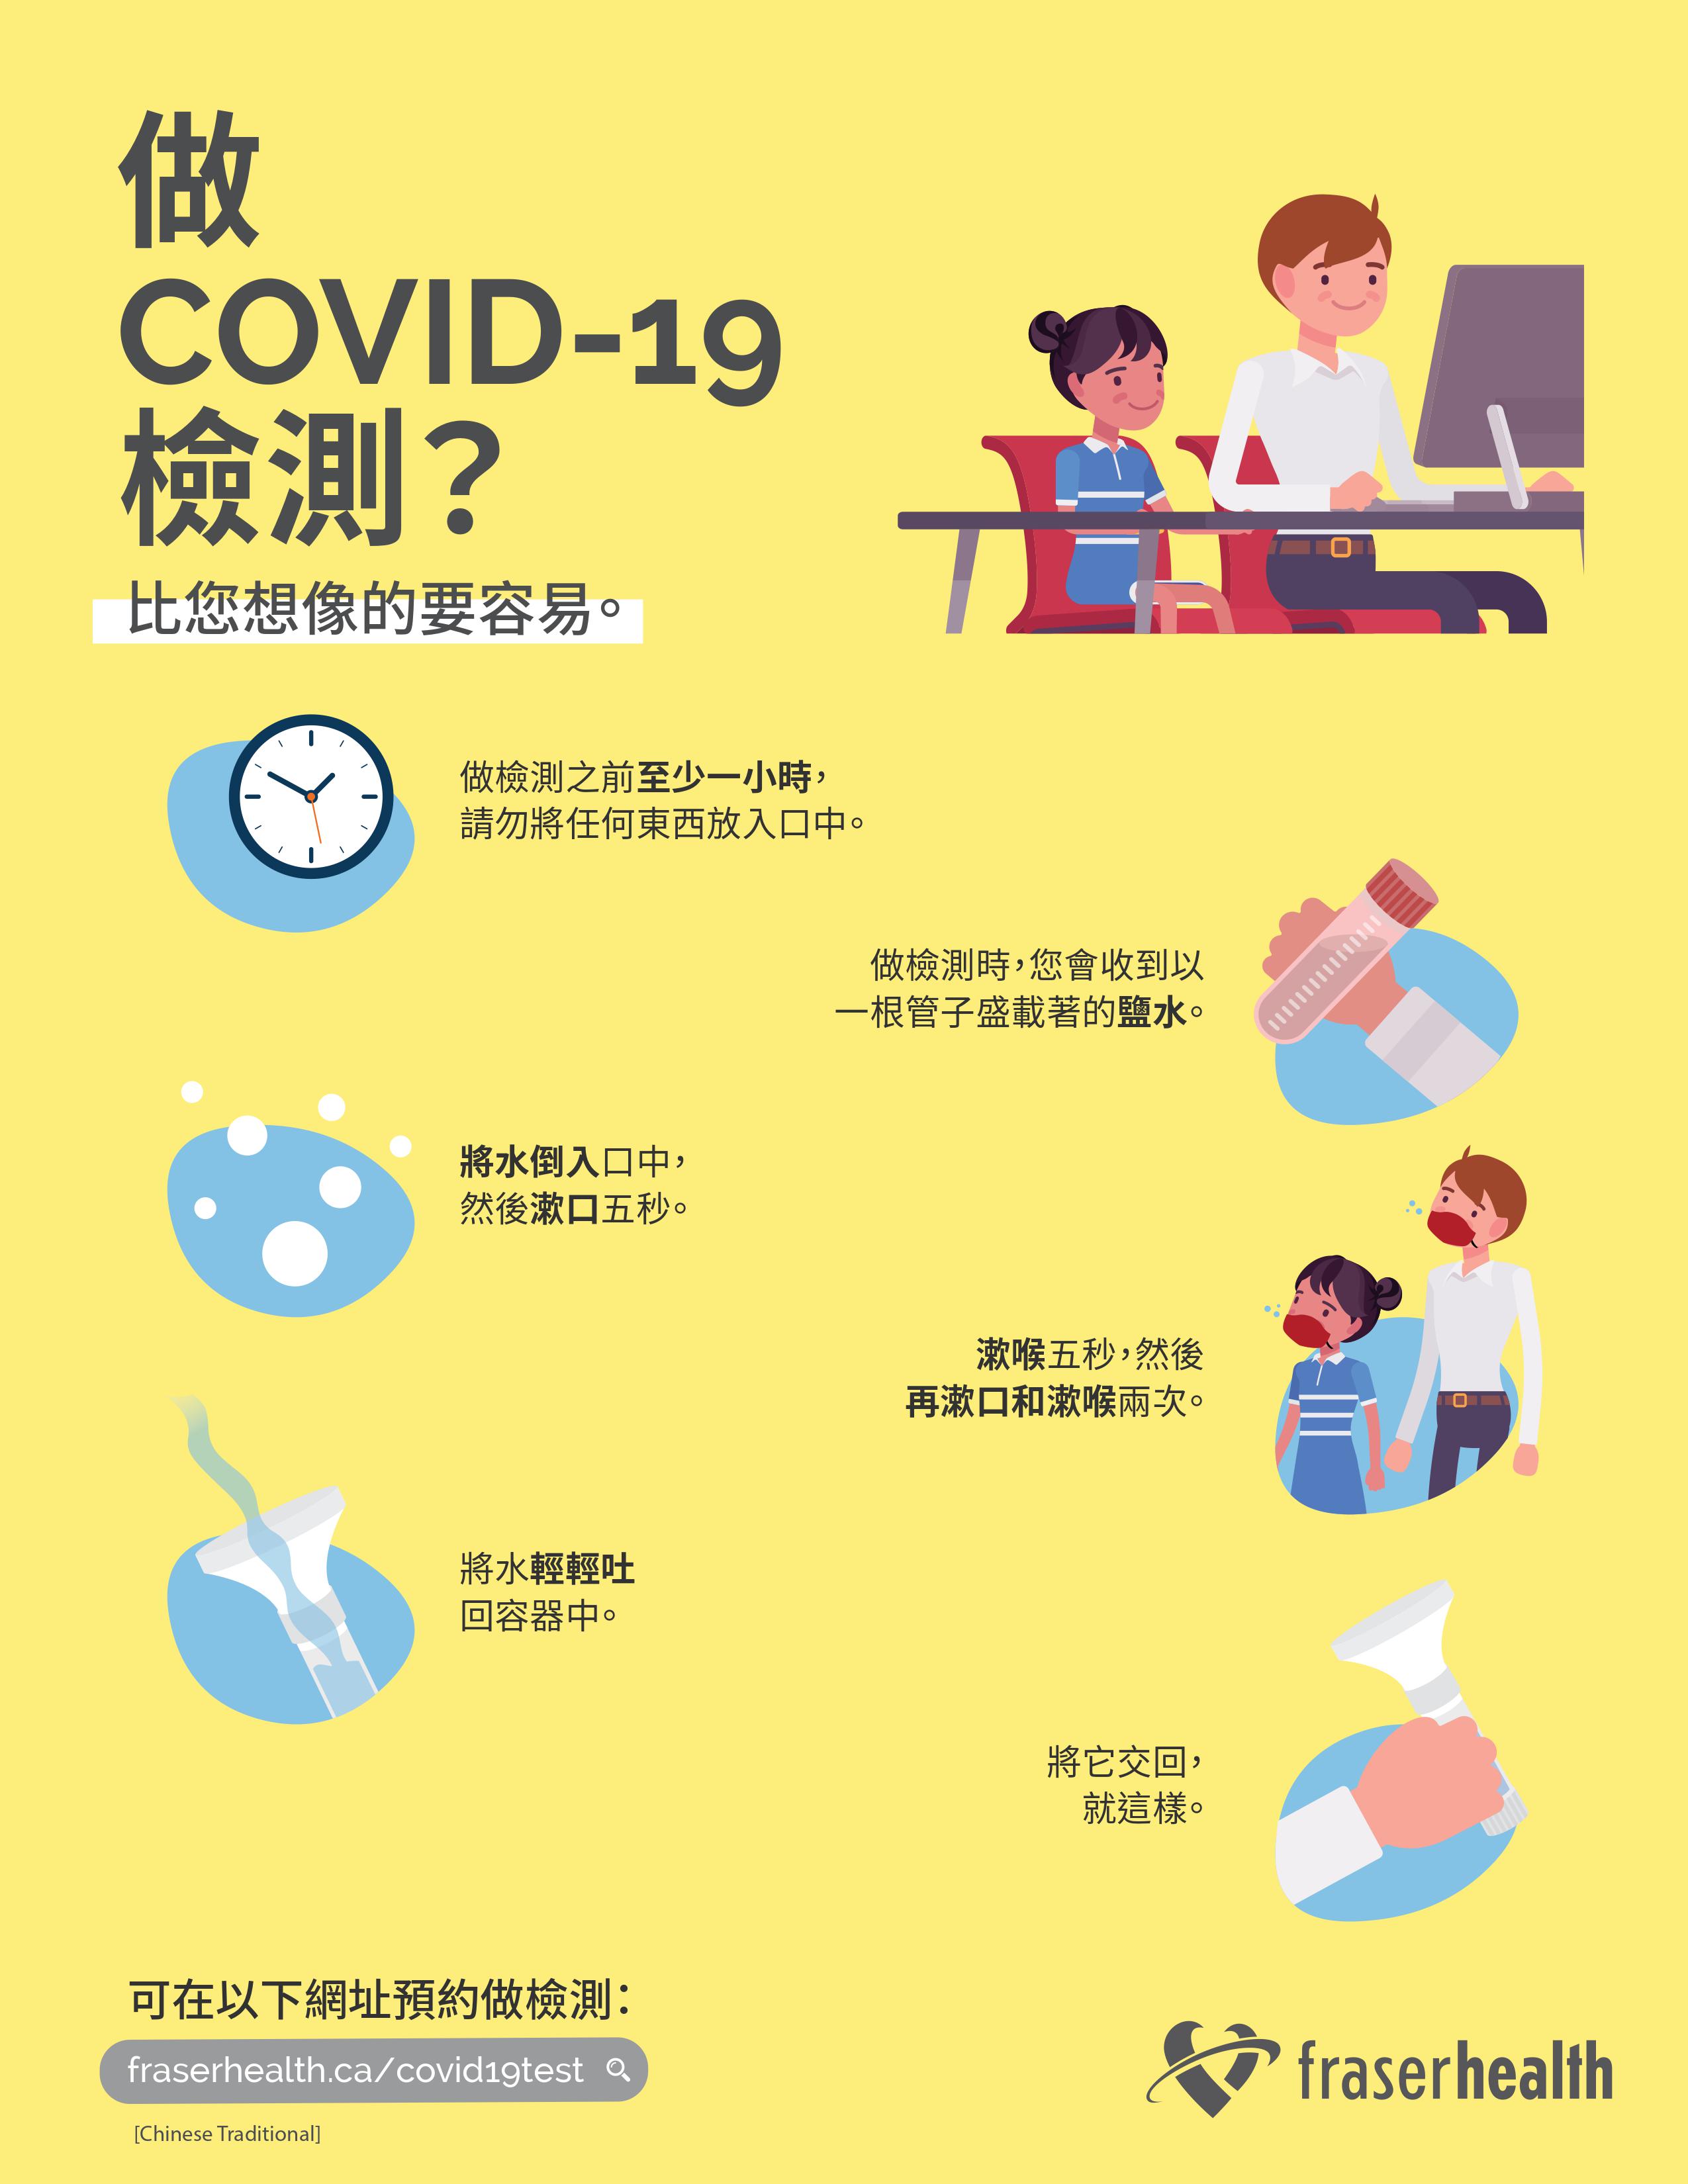 Instructions on how to prepare for your COVID-19 test in Traditional Chinese